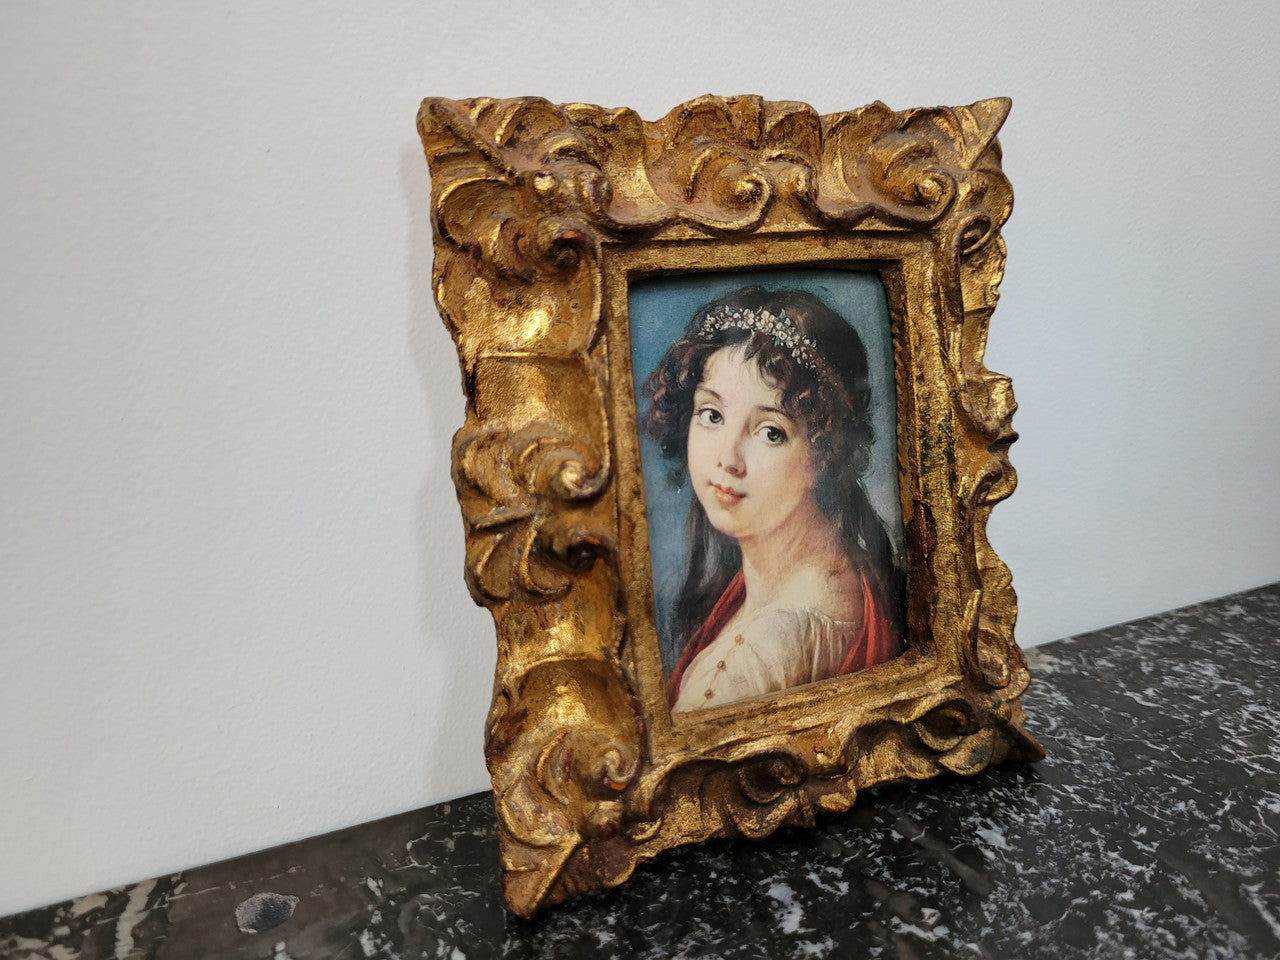 Two Italian framed prints in decorative gilt frames. In good original condition. Can be purchased as a pair or individually for $25- each.